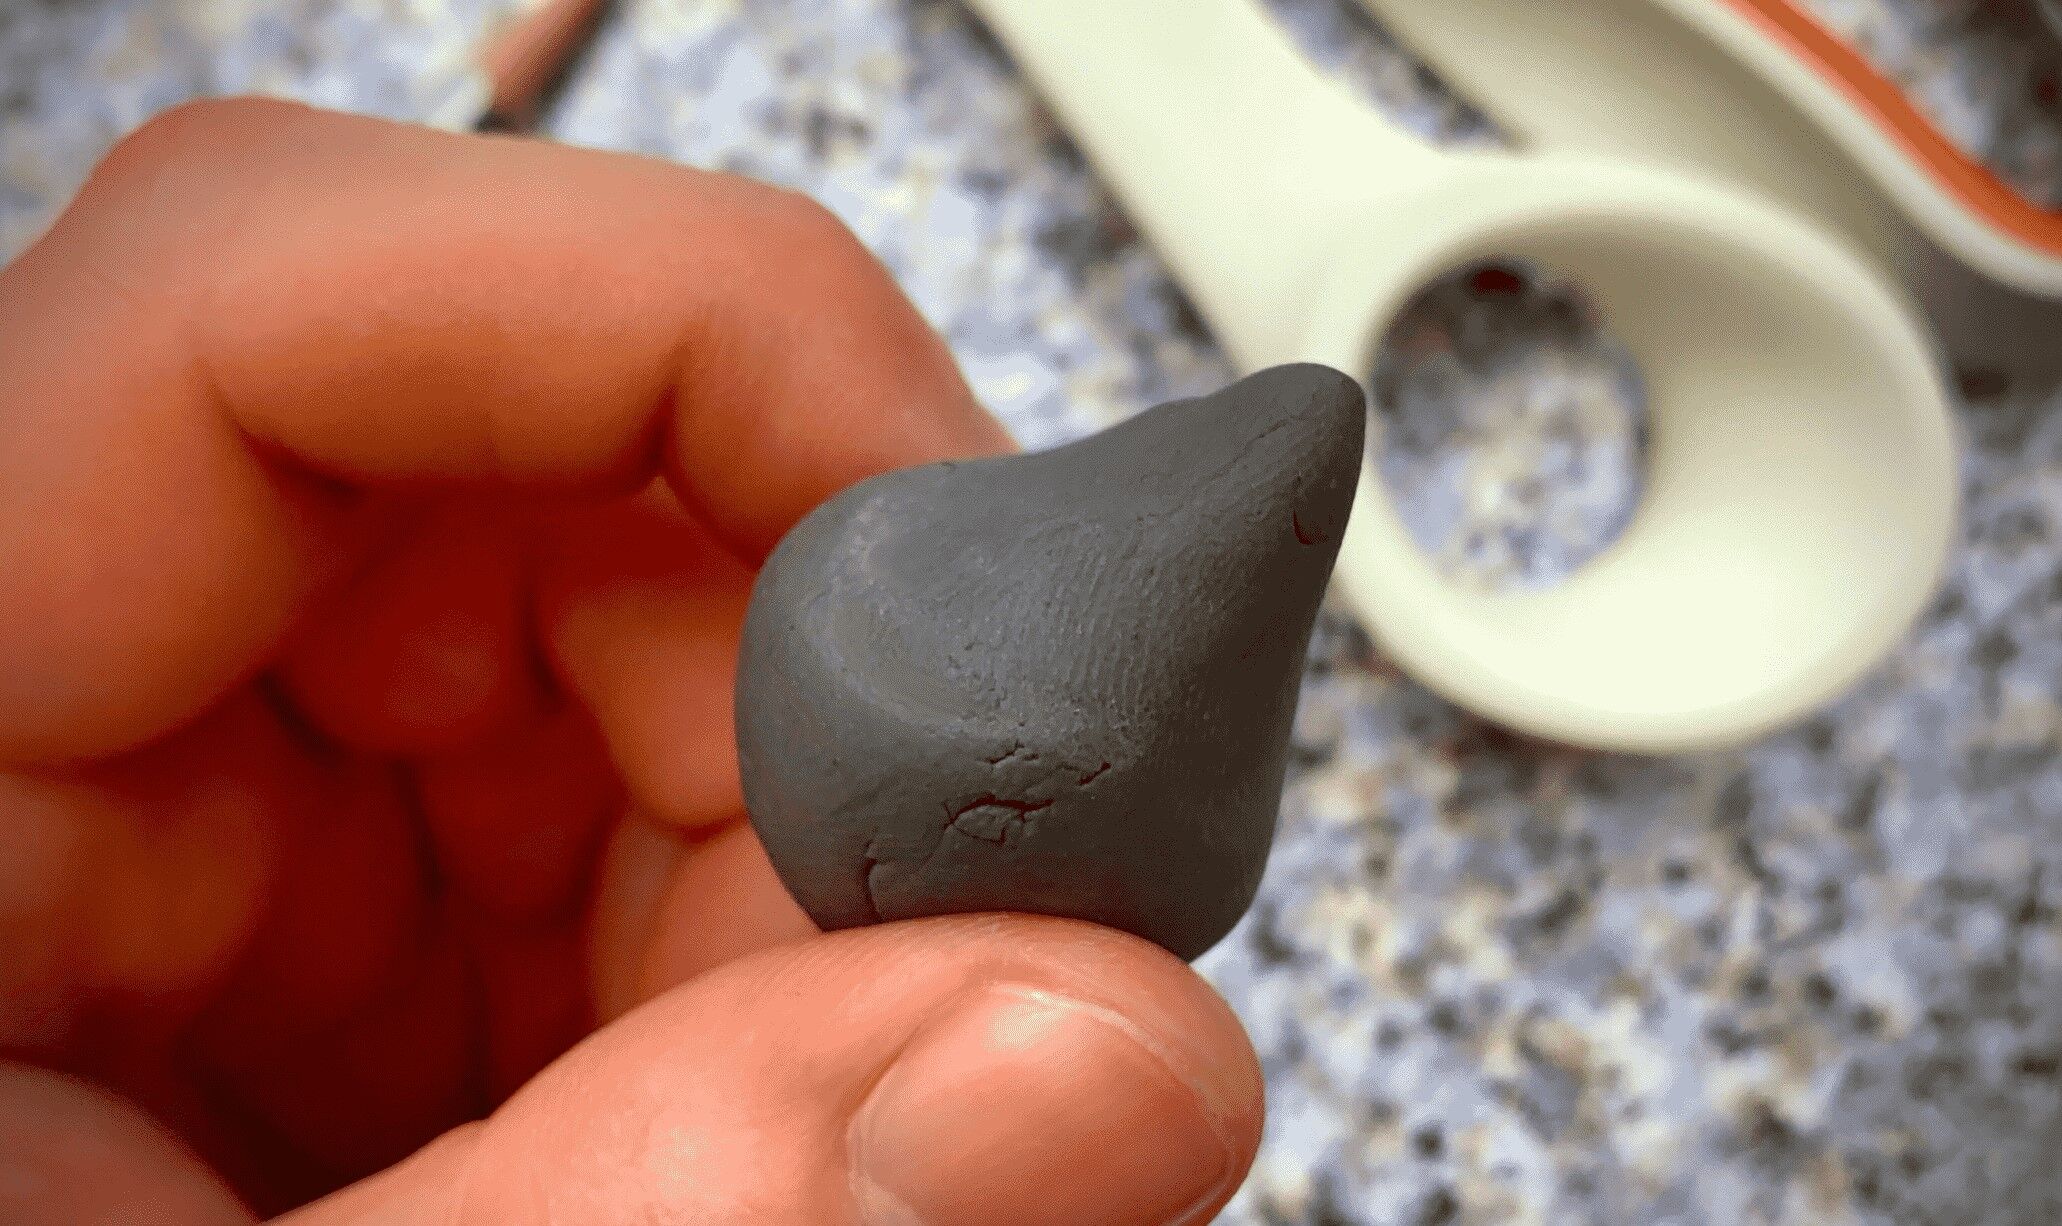 What is a Kneaded Eraser?